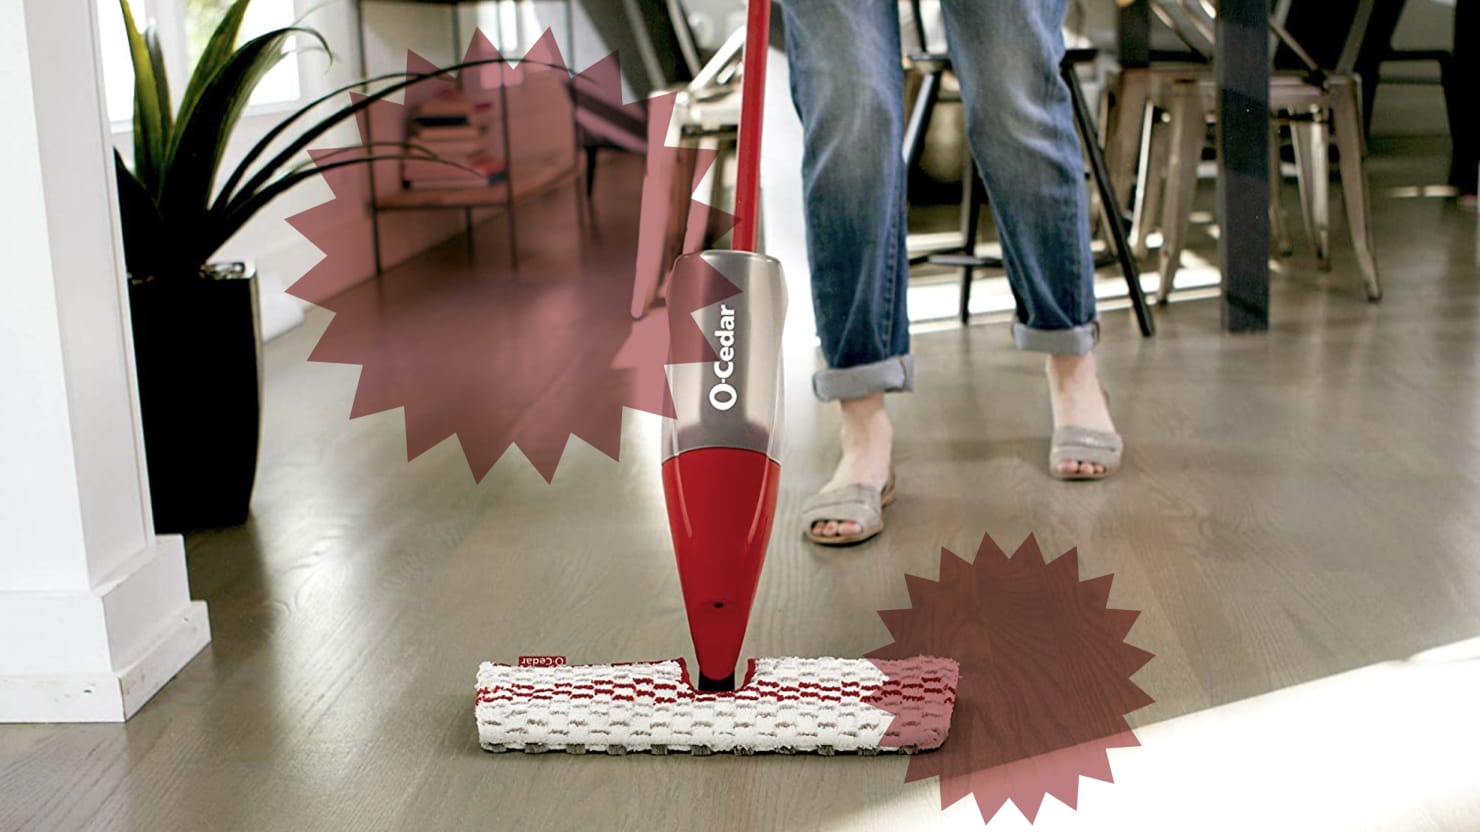 O-Cedar Mop Is a Reusable Replacement for a Swiffer